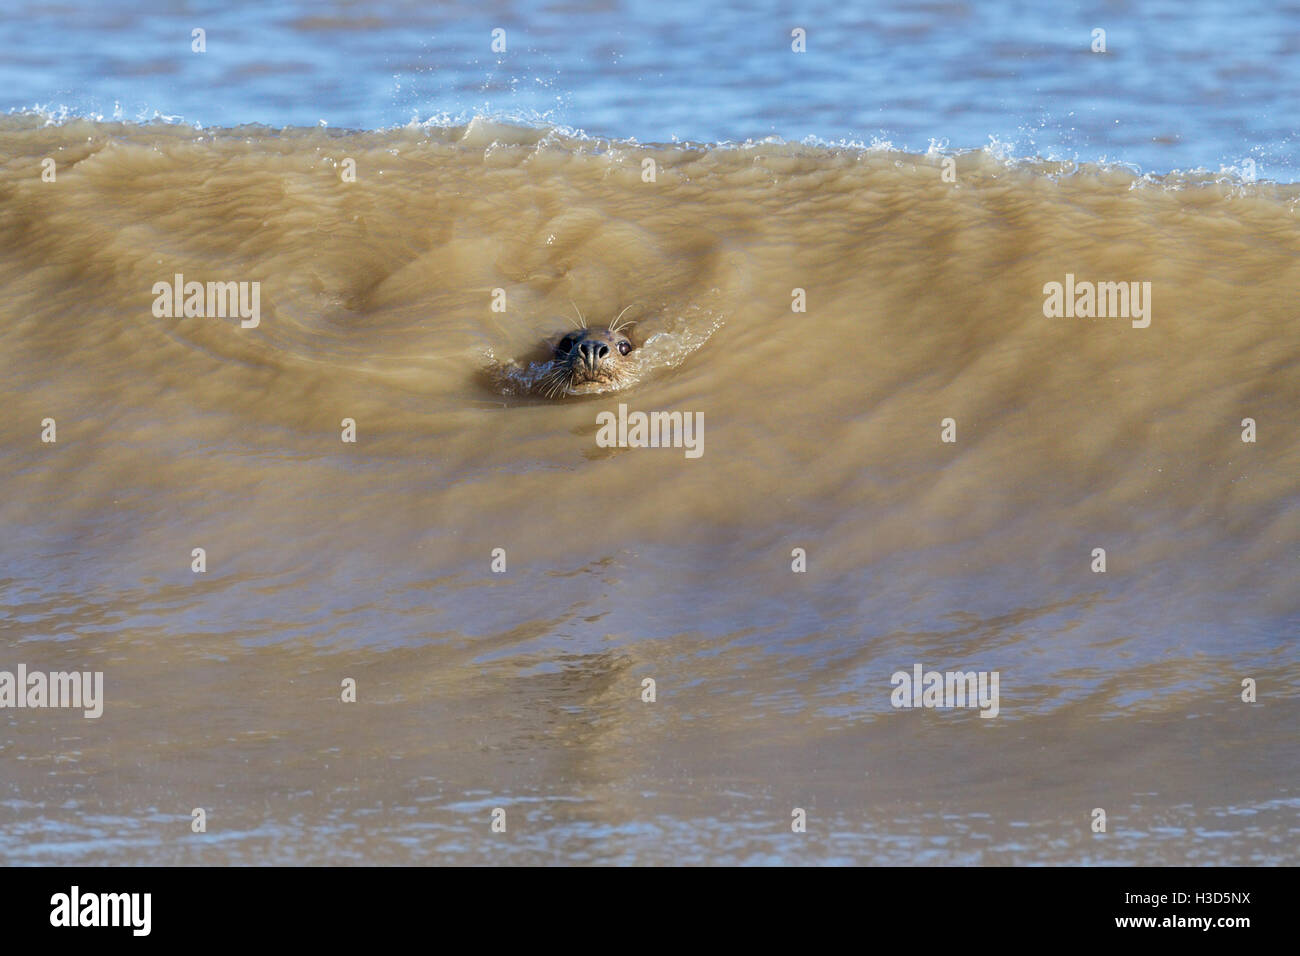 An adult female Grey seal swims amidst the surf, North Sea coast, Norfolk, England Stock Photo